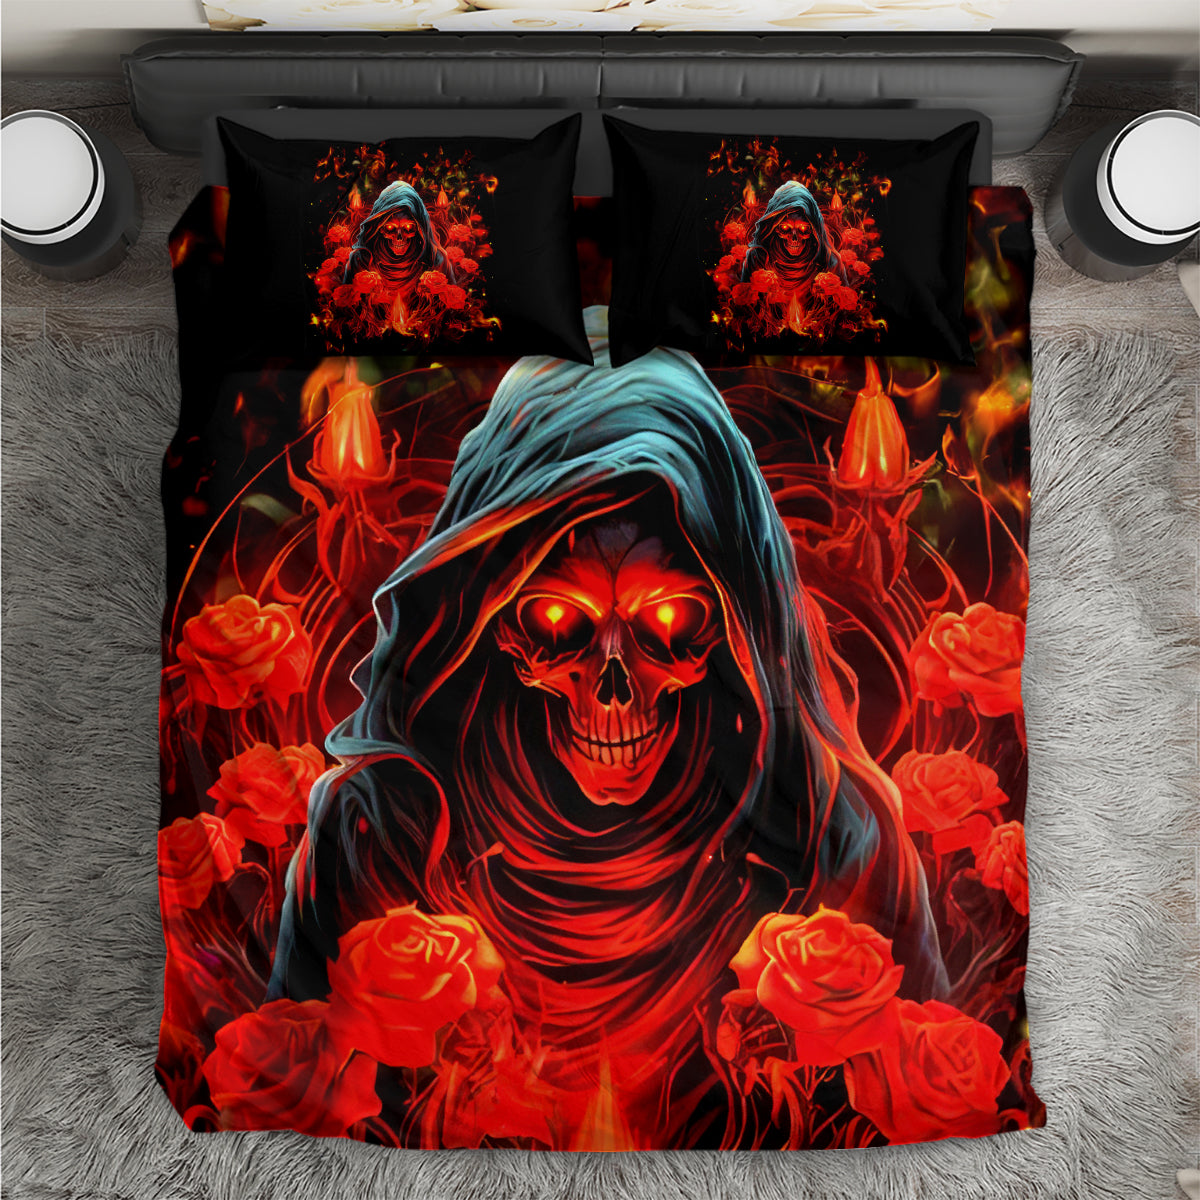 Rose Skull Bedding Set Iam Sweet Girl But If You Piss Me Off